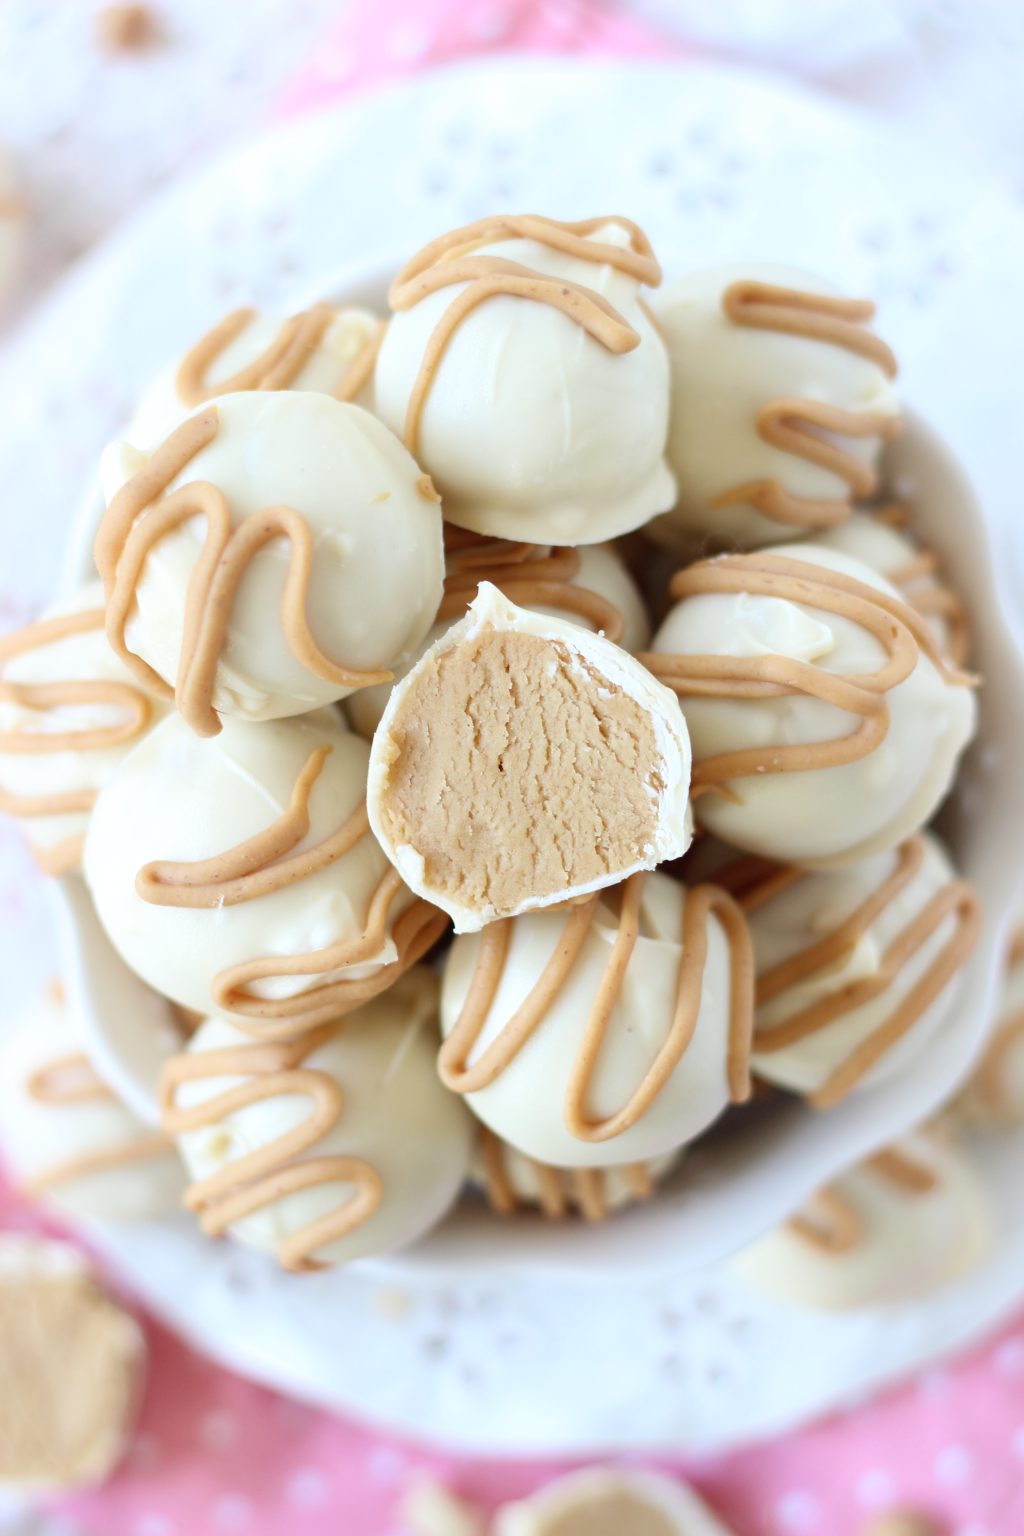 Traditional peanut butter buckeyes, dunked in a white chocolate bath, with ...